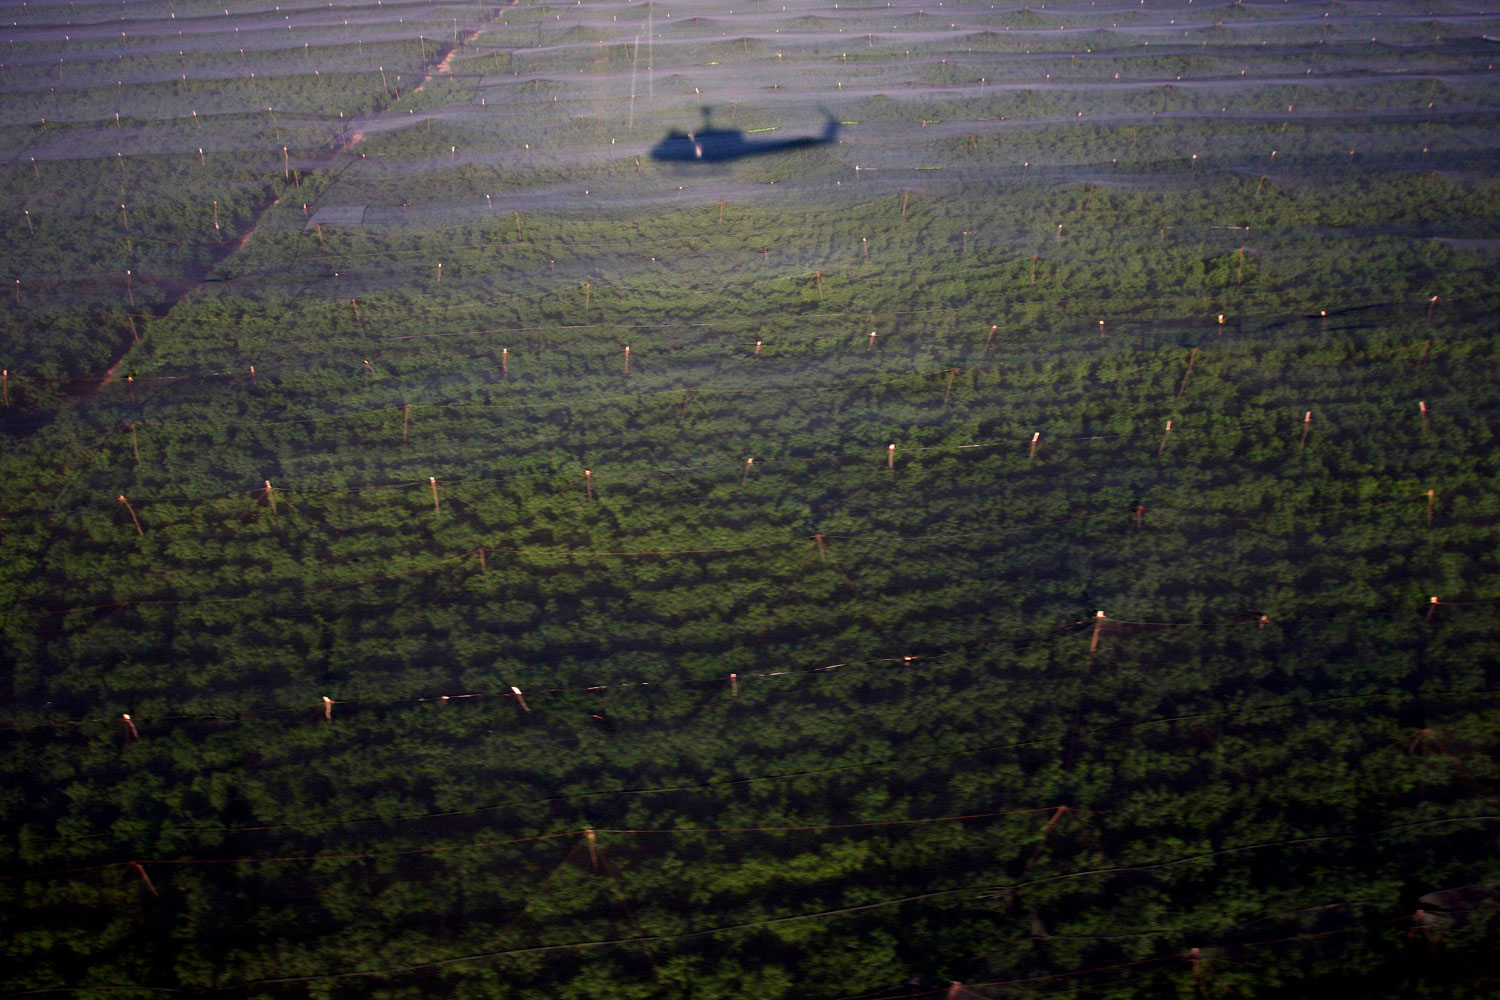 July 13, 2011. An army helicopter casts a shadow over parts of the biggest marijuana plantation found in Mexico, in San Quintin, about 220 miles from Tijuana. Mexican soldiers discovered the plantation in a remote desert surrounded by cacti. Soldiers patrolling the area found 300 acres of pot plants being tended by dozens of men.